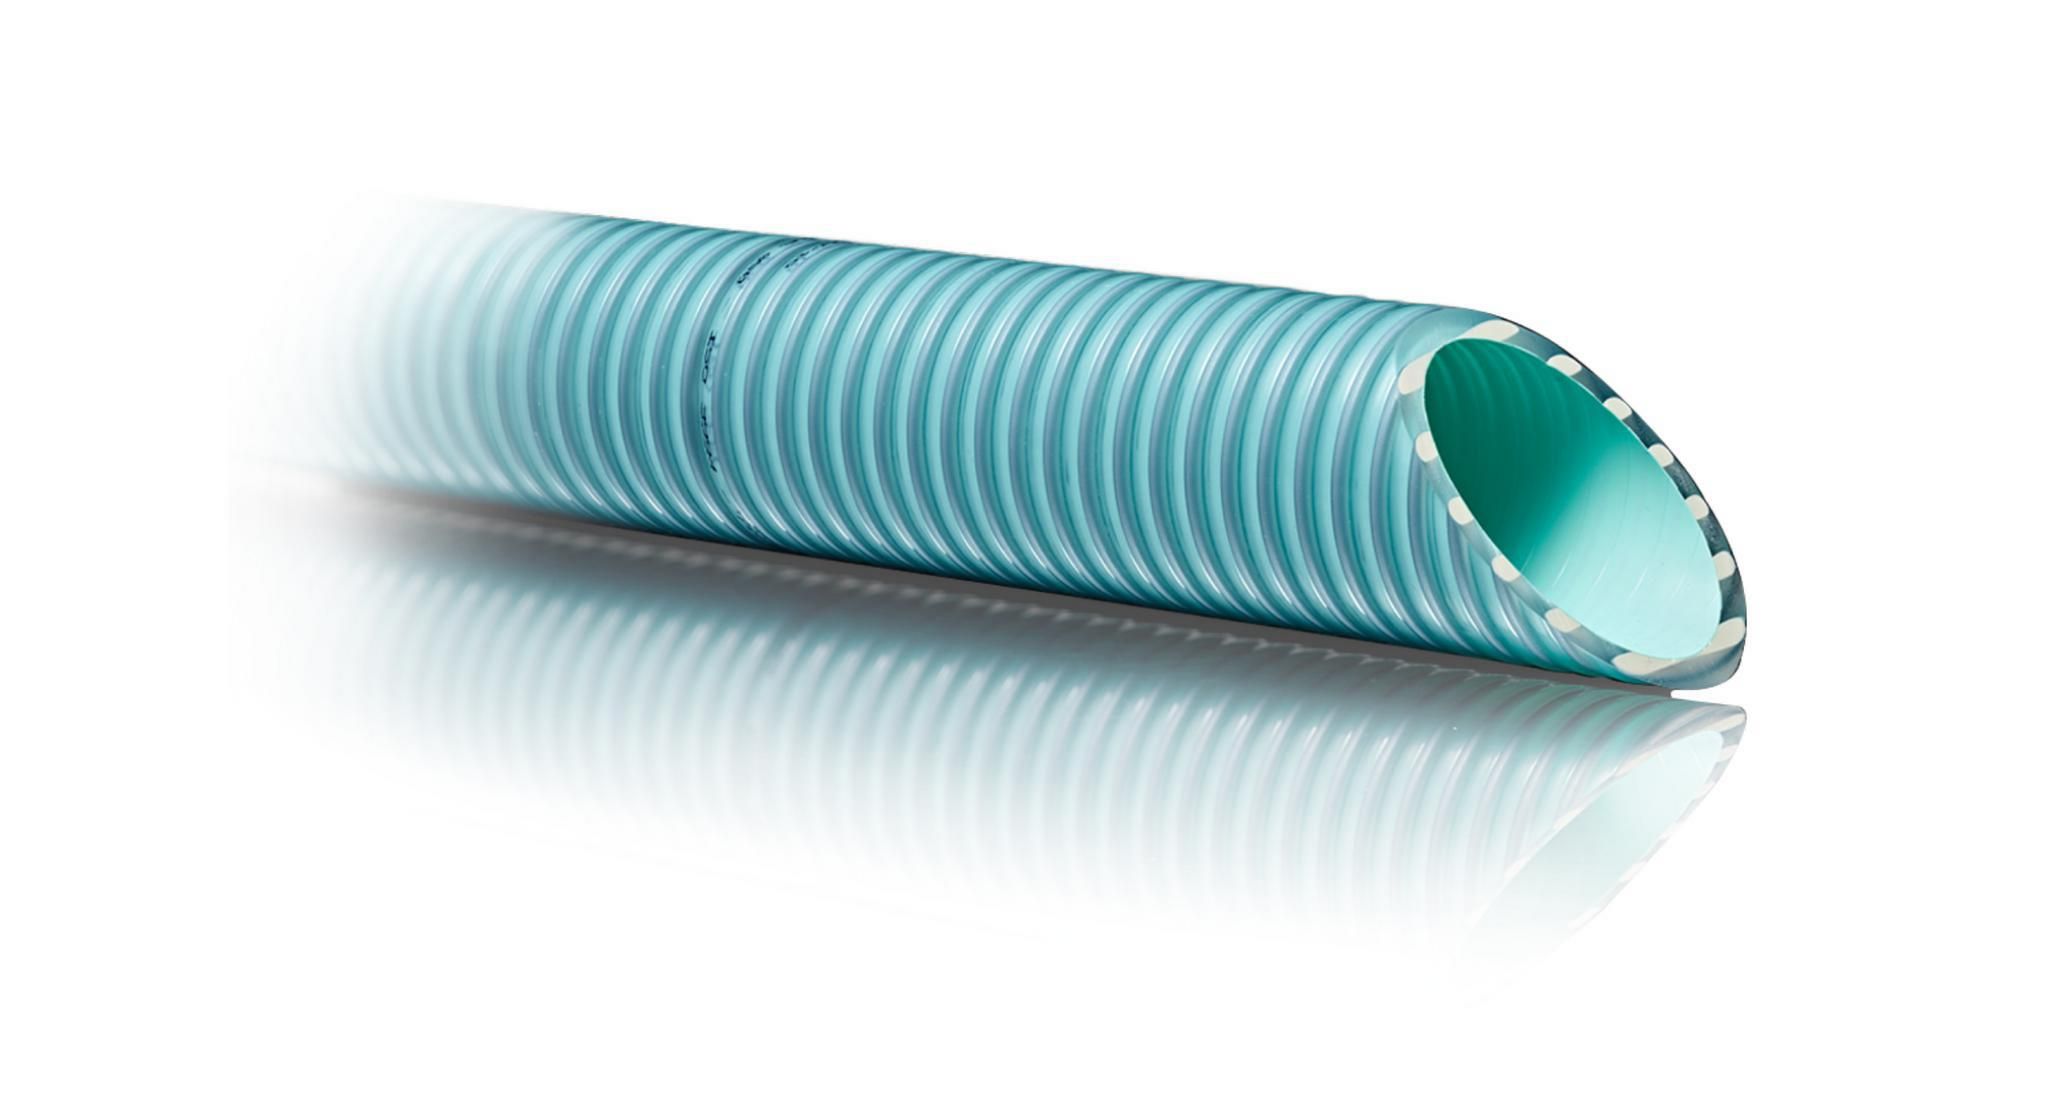 FITT B-Active, the flexible spiral hose for in-ground pools and hot tubs